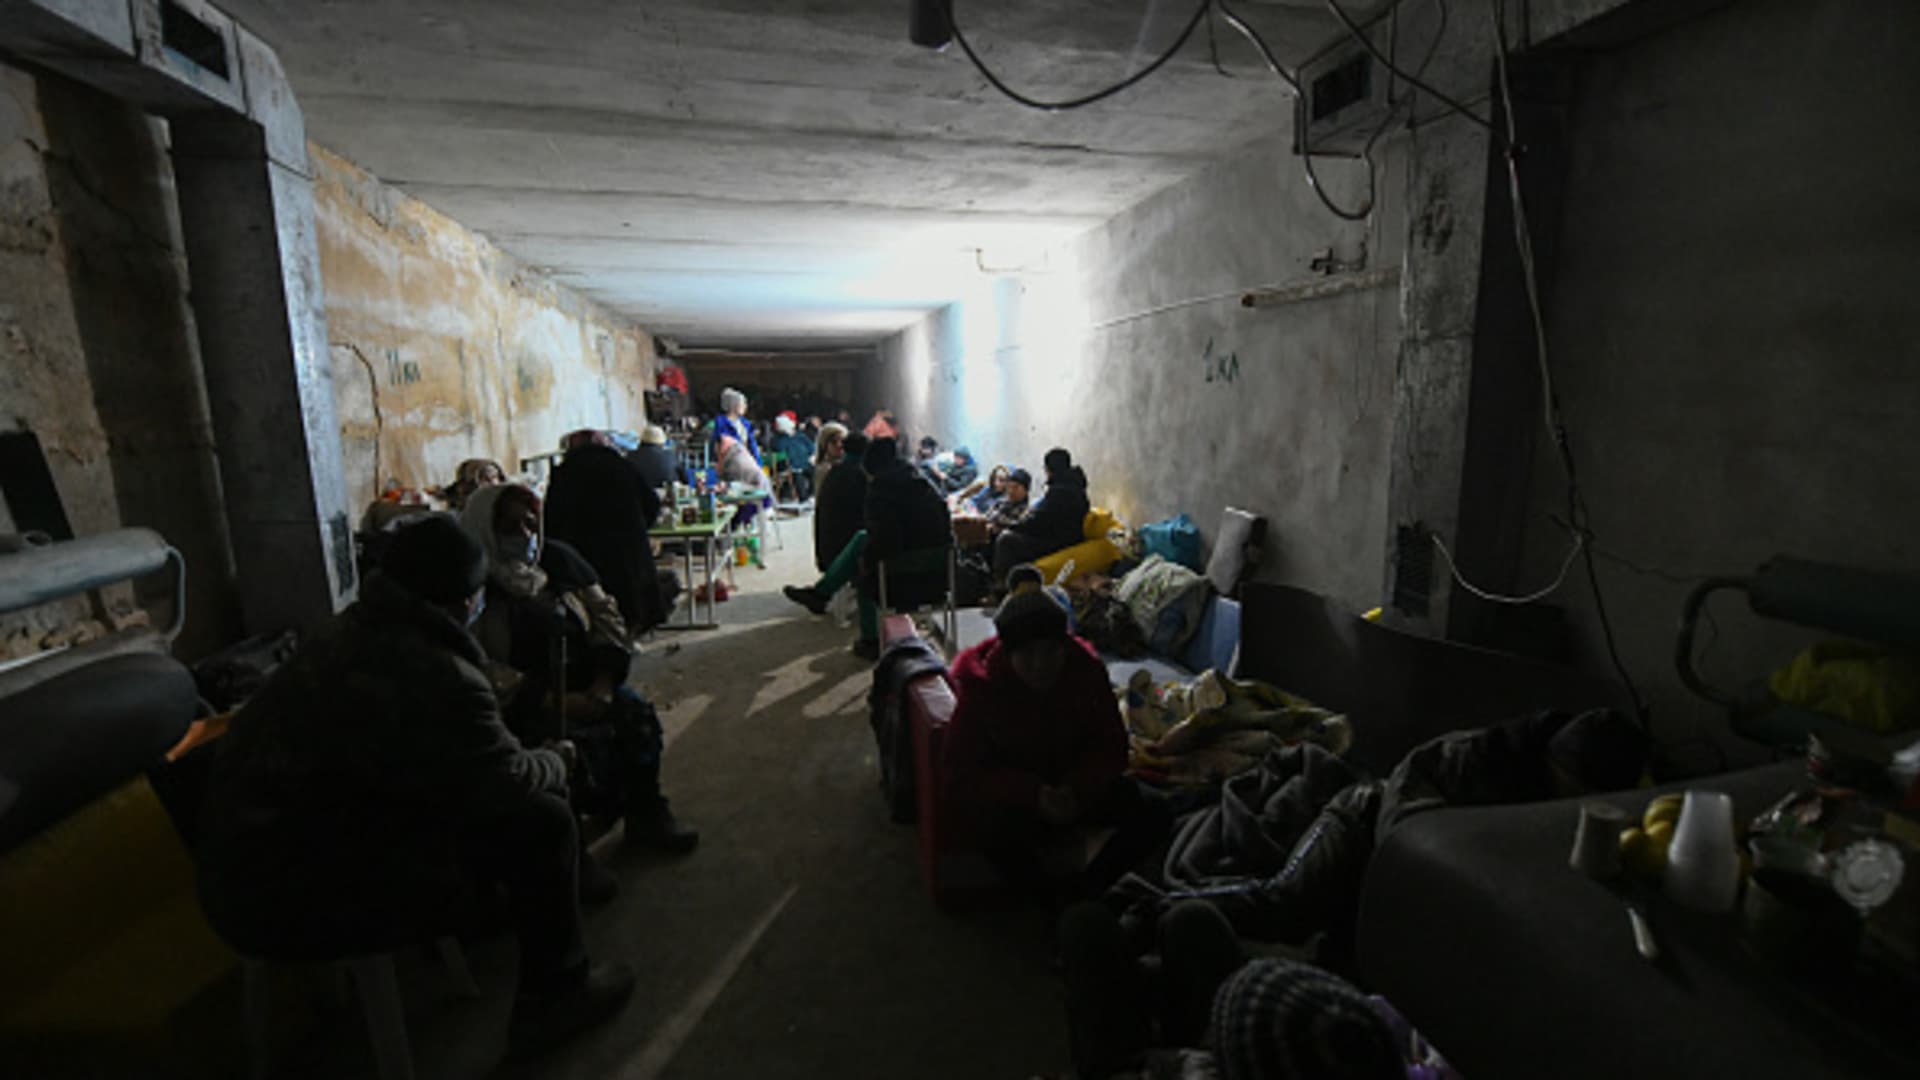 Residents stay in a bomb shelter after recent shellings in the separatist-controlled settlements in Mykolayivkaand Bugas in the Donetsk regionof Ukraine on March 01, 2022.